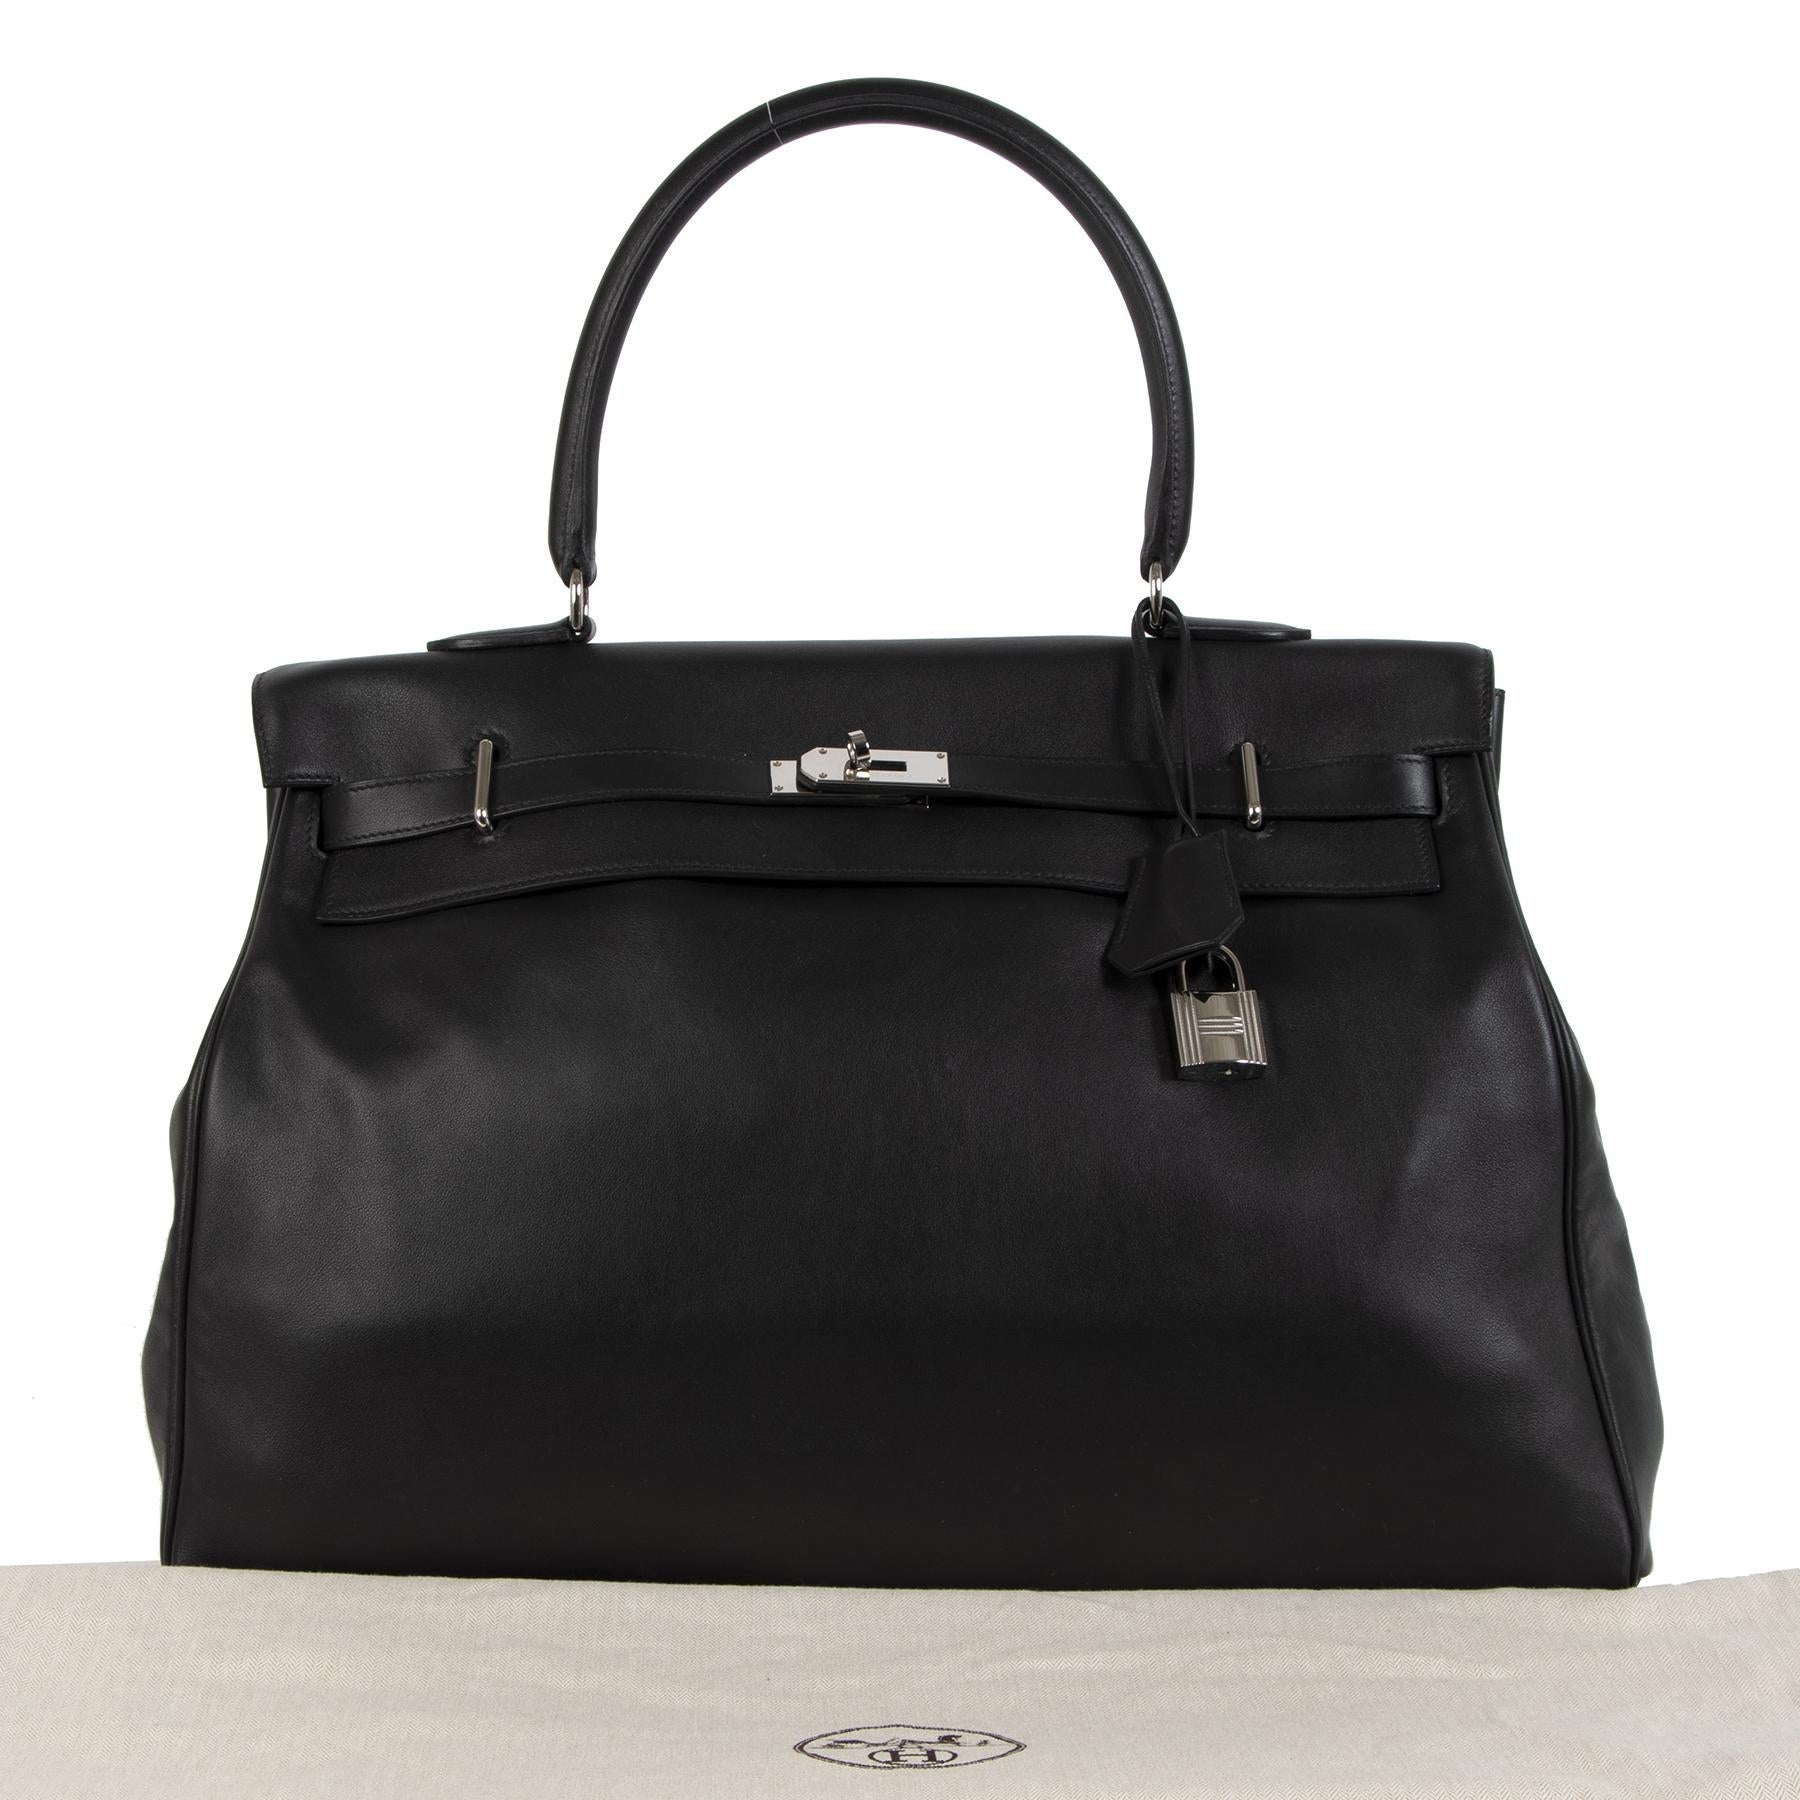 You can travel in style - or you can go the extra mile and travel in complete luxury with this limited edition Hermès Kelly Relax 50 Travel Bag. This oversized beauty comes in black Sikkim leather, a very soft, lightweight and smooth goat leather